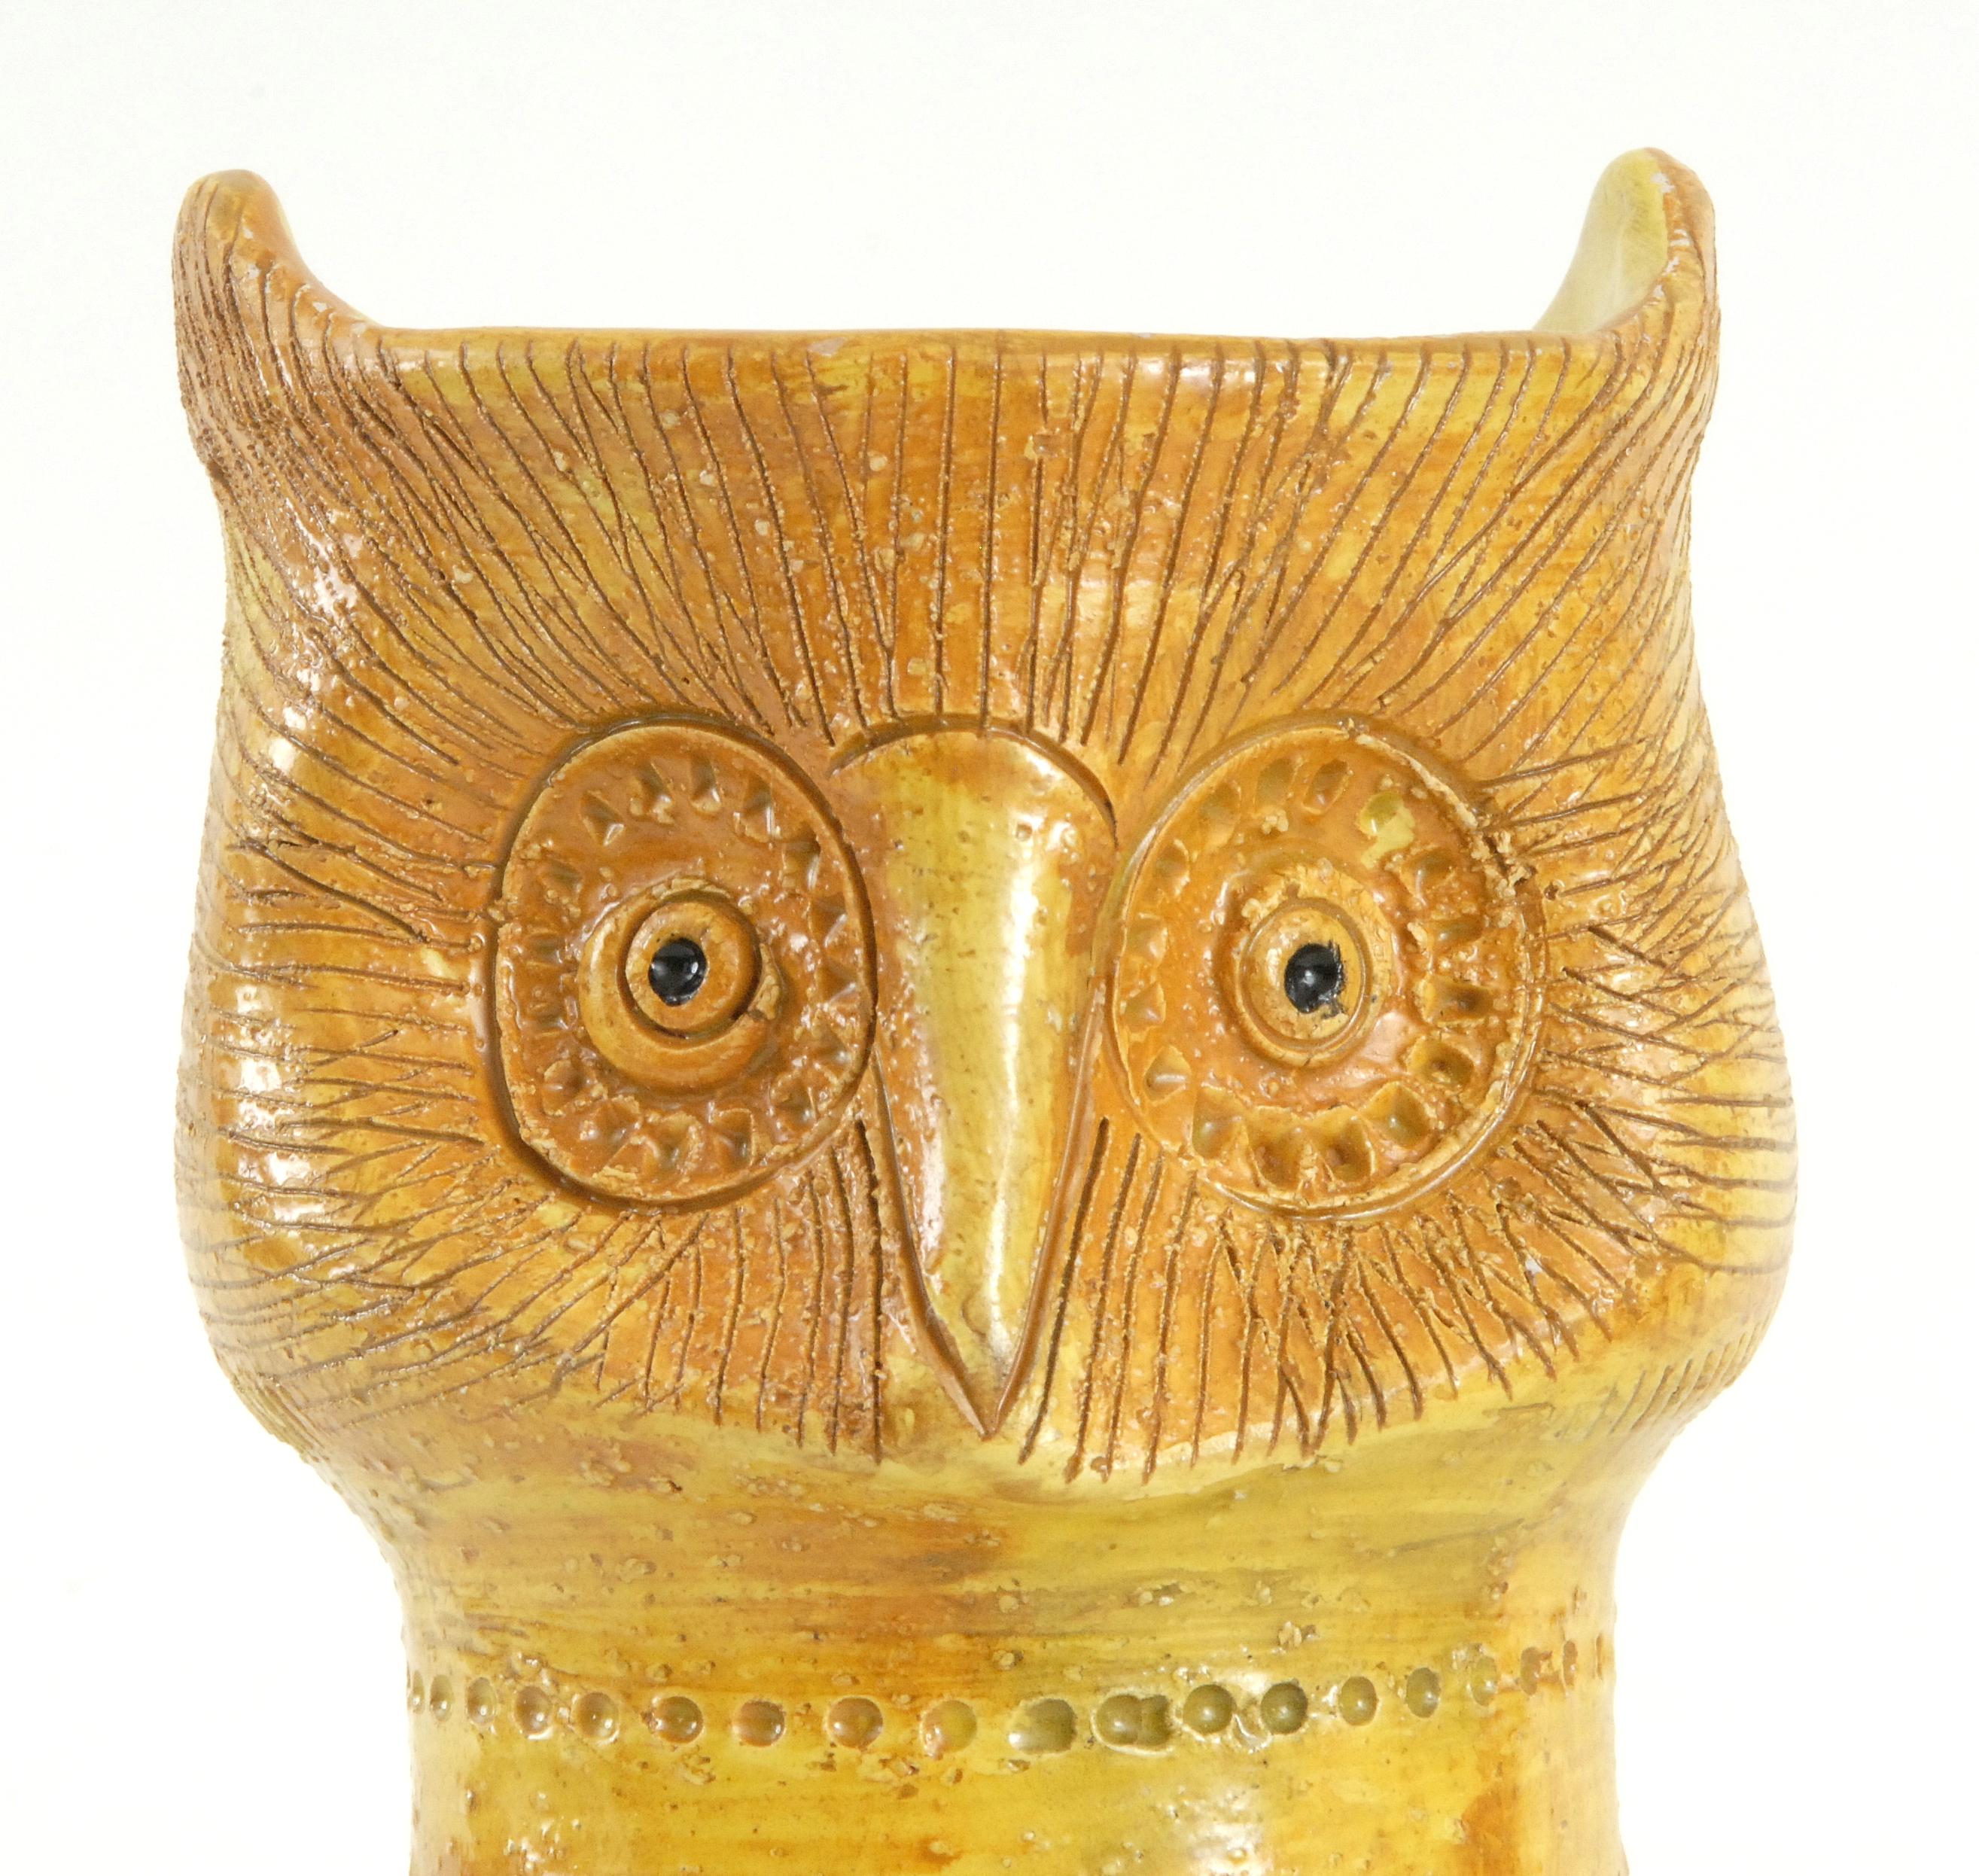 Nicely detailed owl vase by Aldo Londi for Bitossi, marked to the base, and with typical circle stamping pattern to the sides.